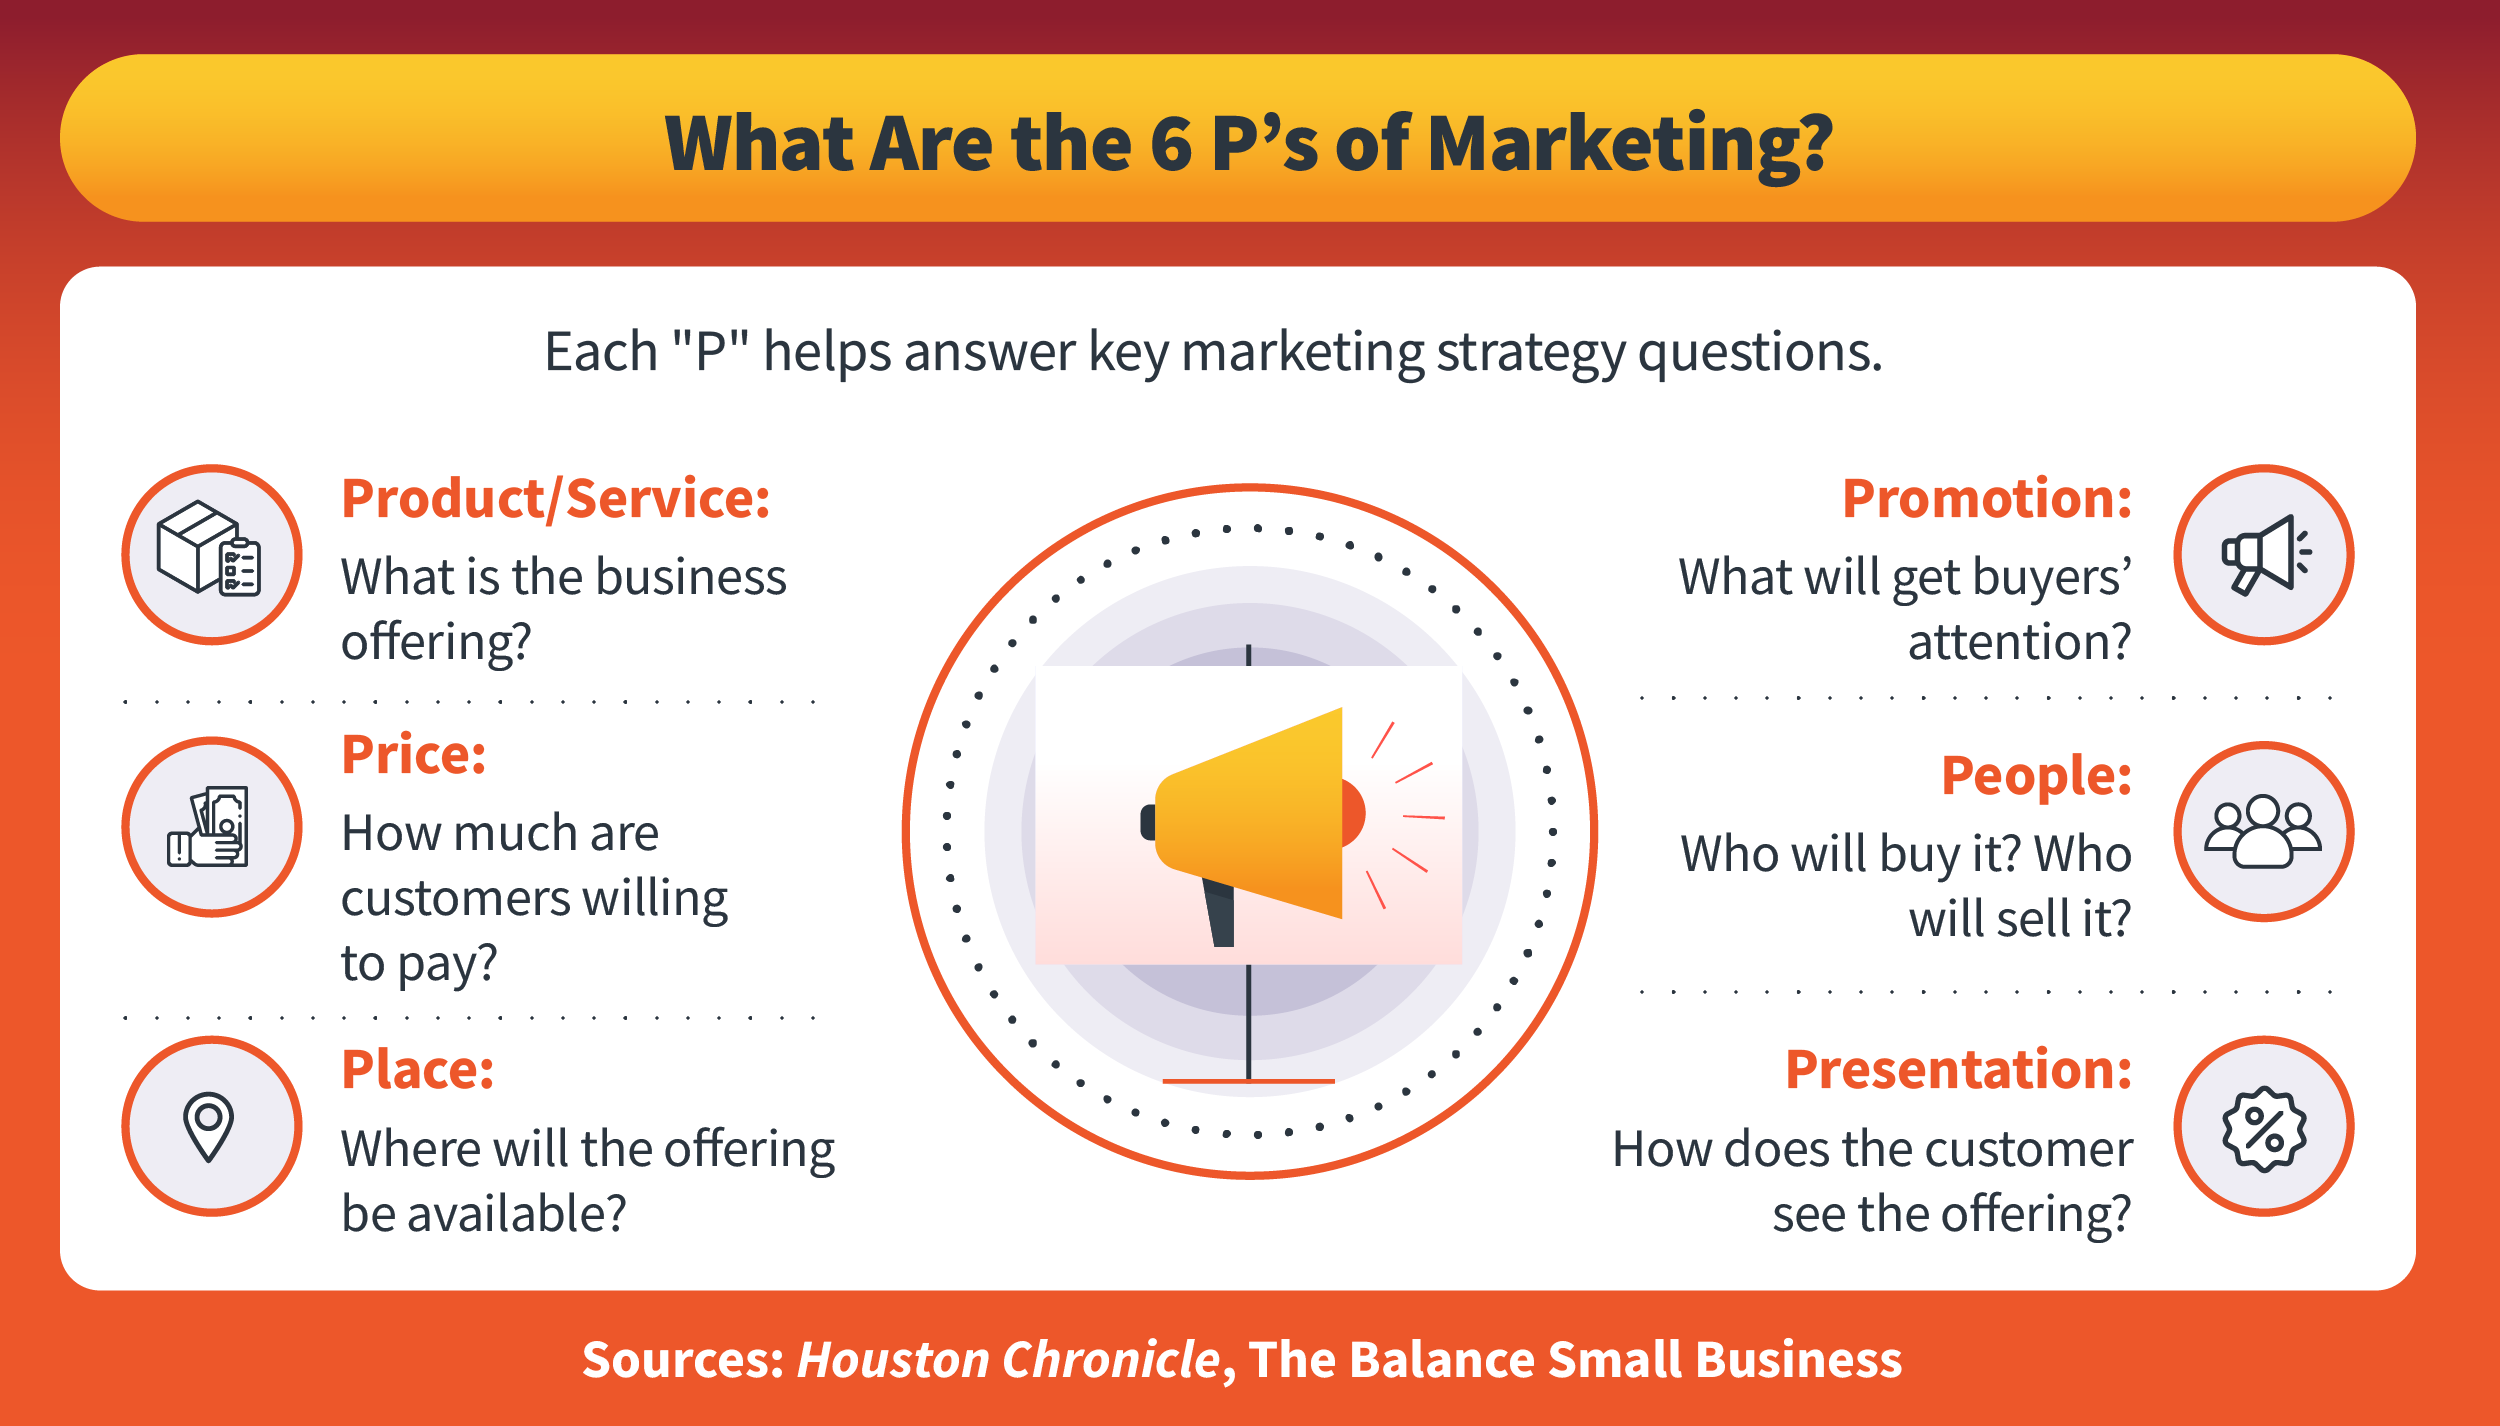 The 6P’s of marketing defined.